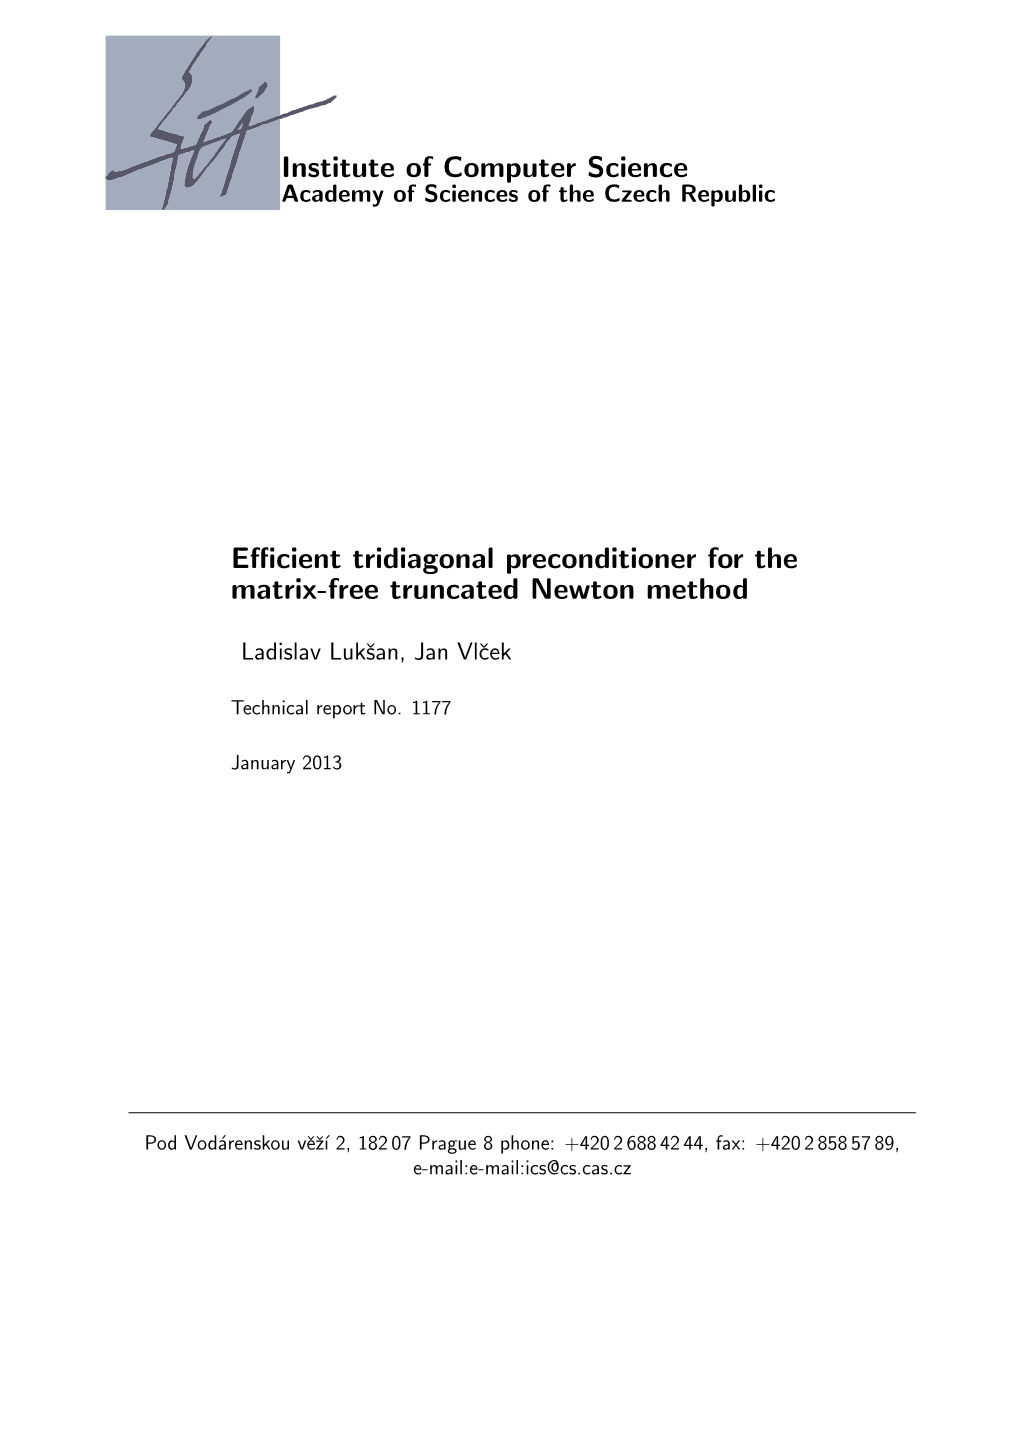 Institute of Computer Science Efficient Tridiagonal Preconditioner for The